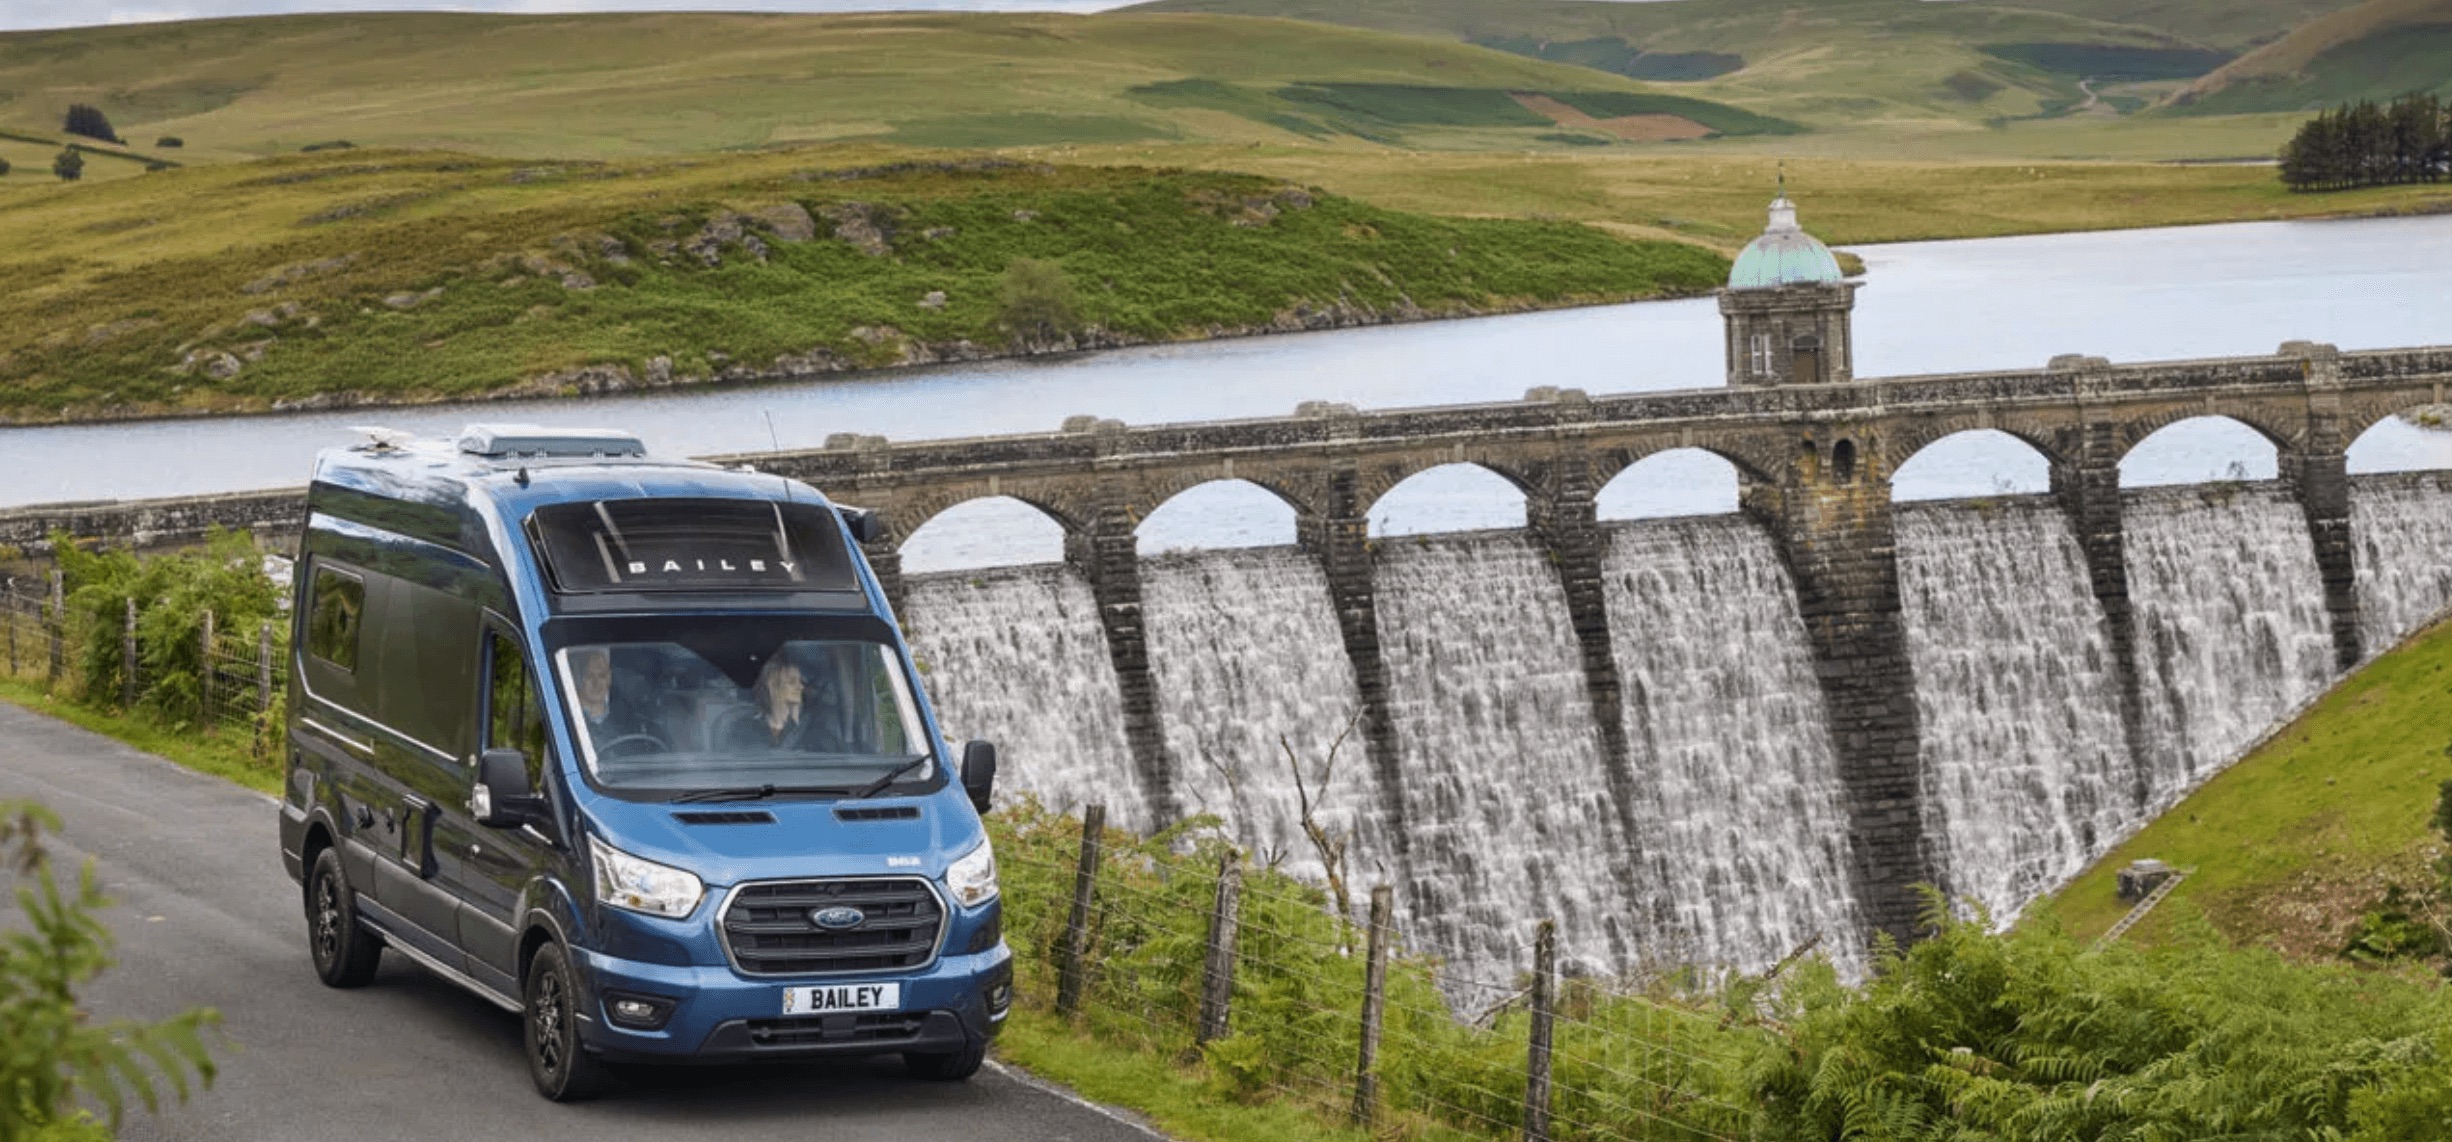 Vehicle Focus: The New Bailey Endeavour – The First Camper by Bailey!